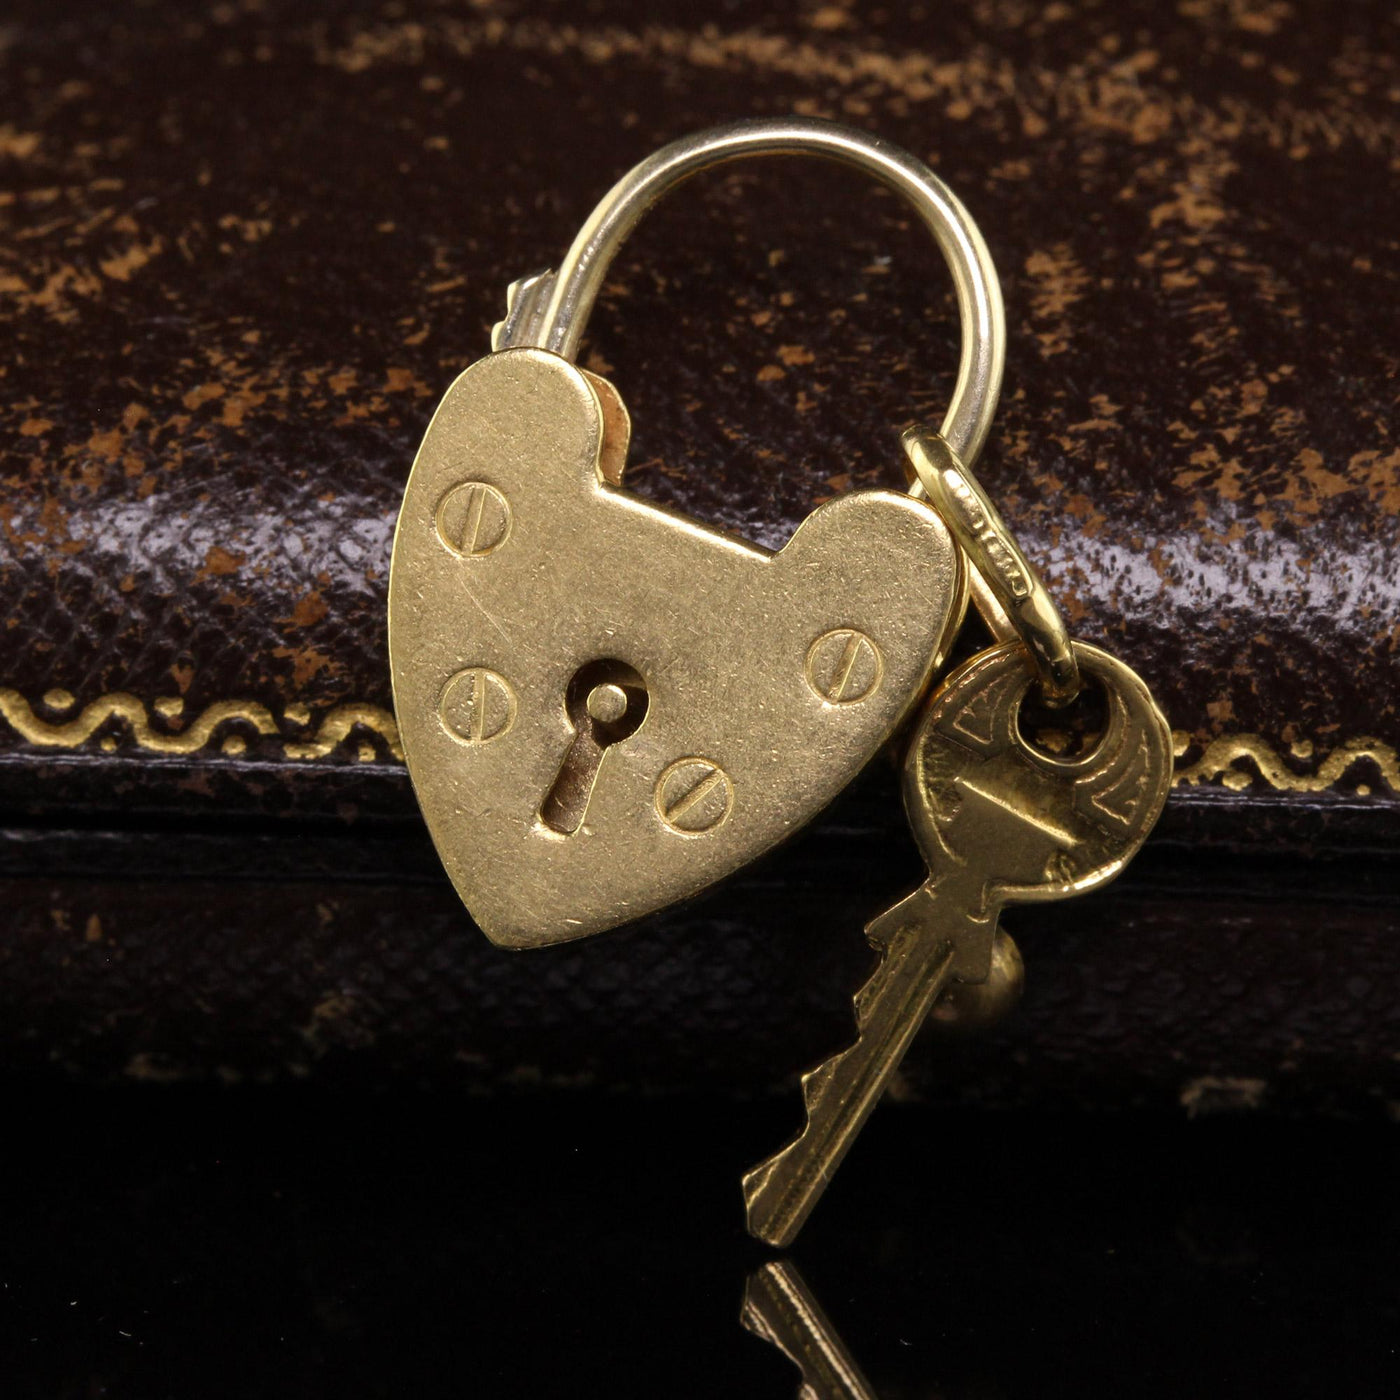 Antique Victorian 18K Yellow Gold Heart Lock and Key Pendant Charm